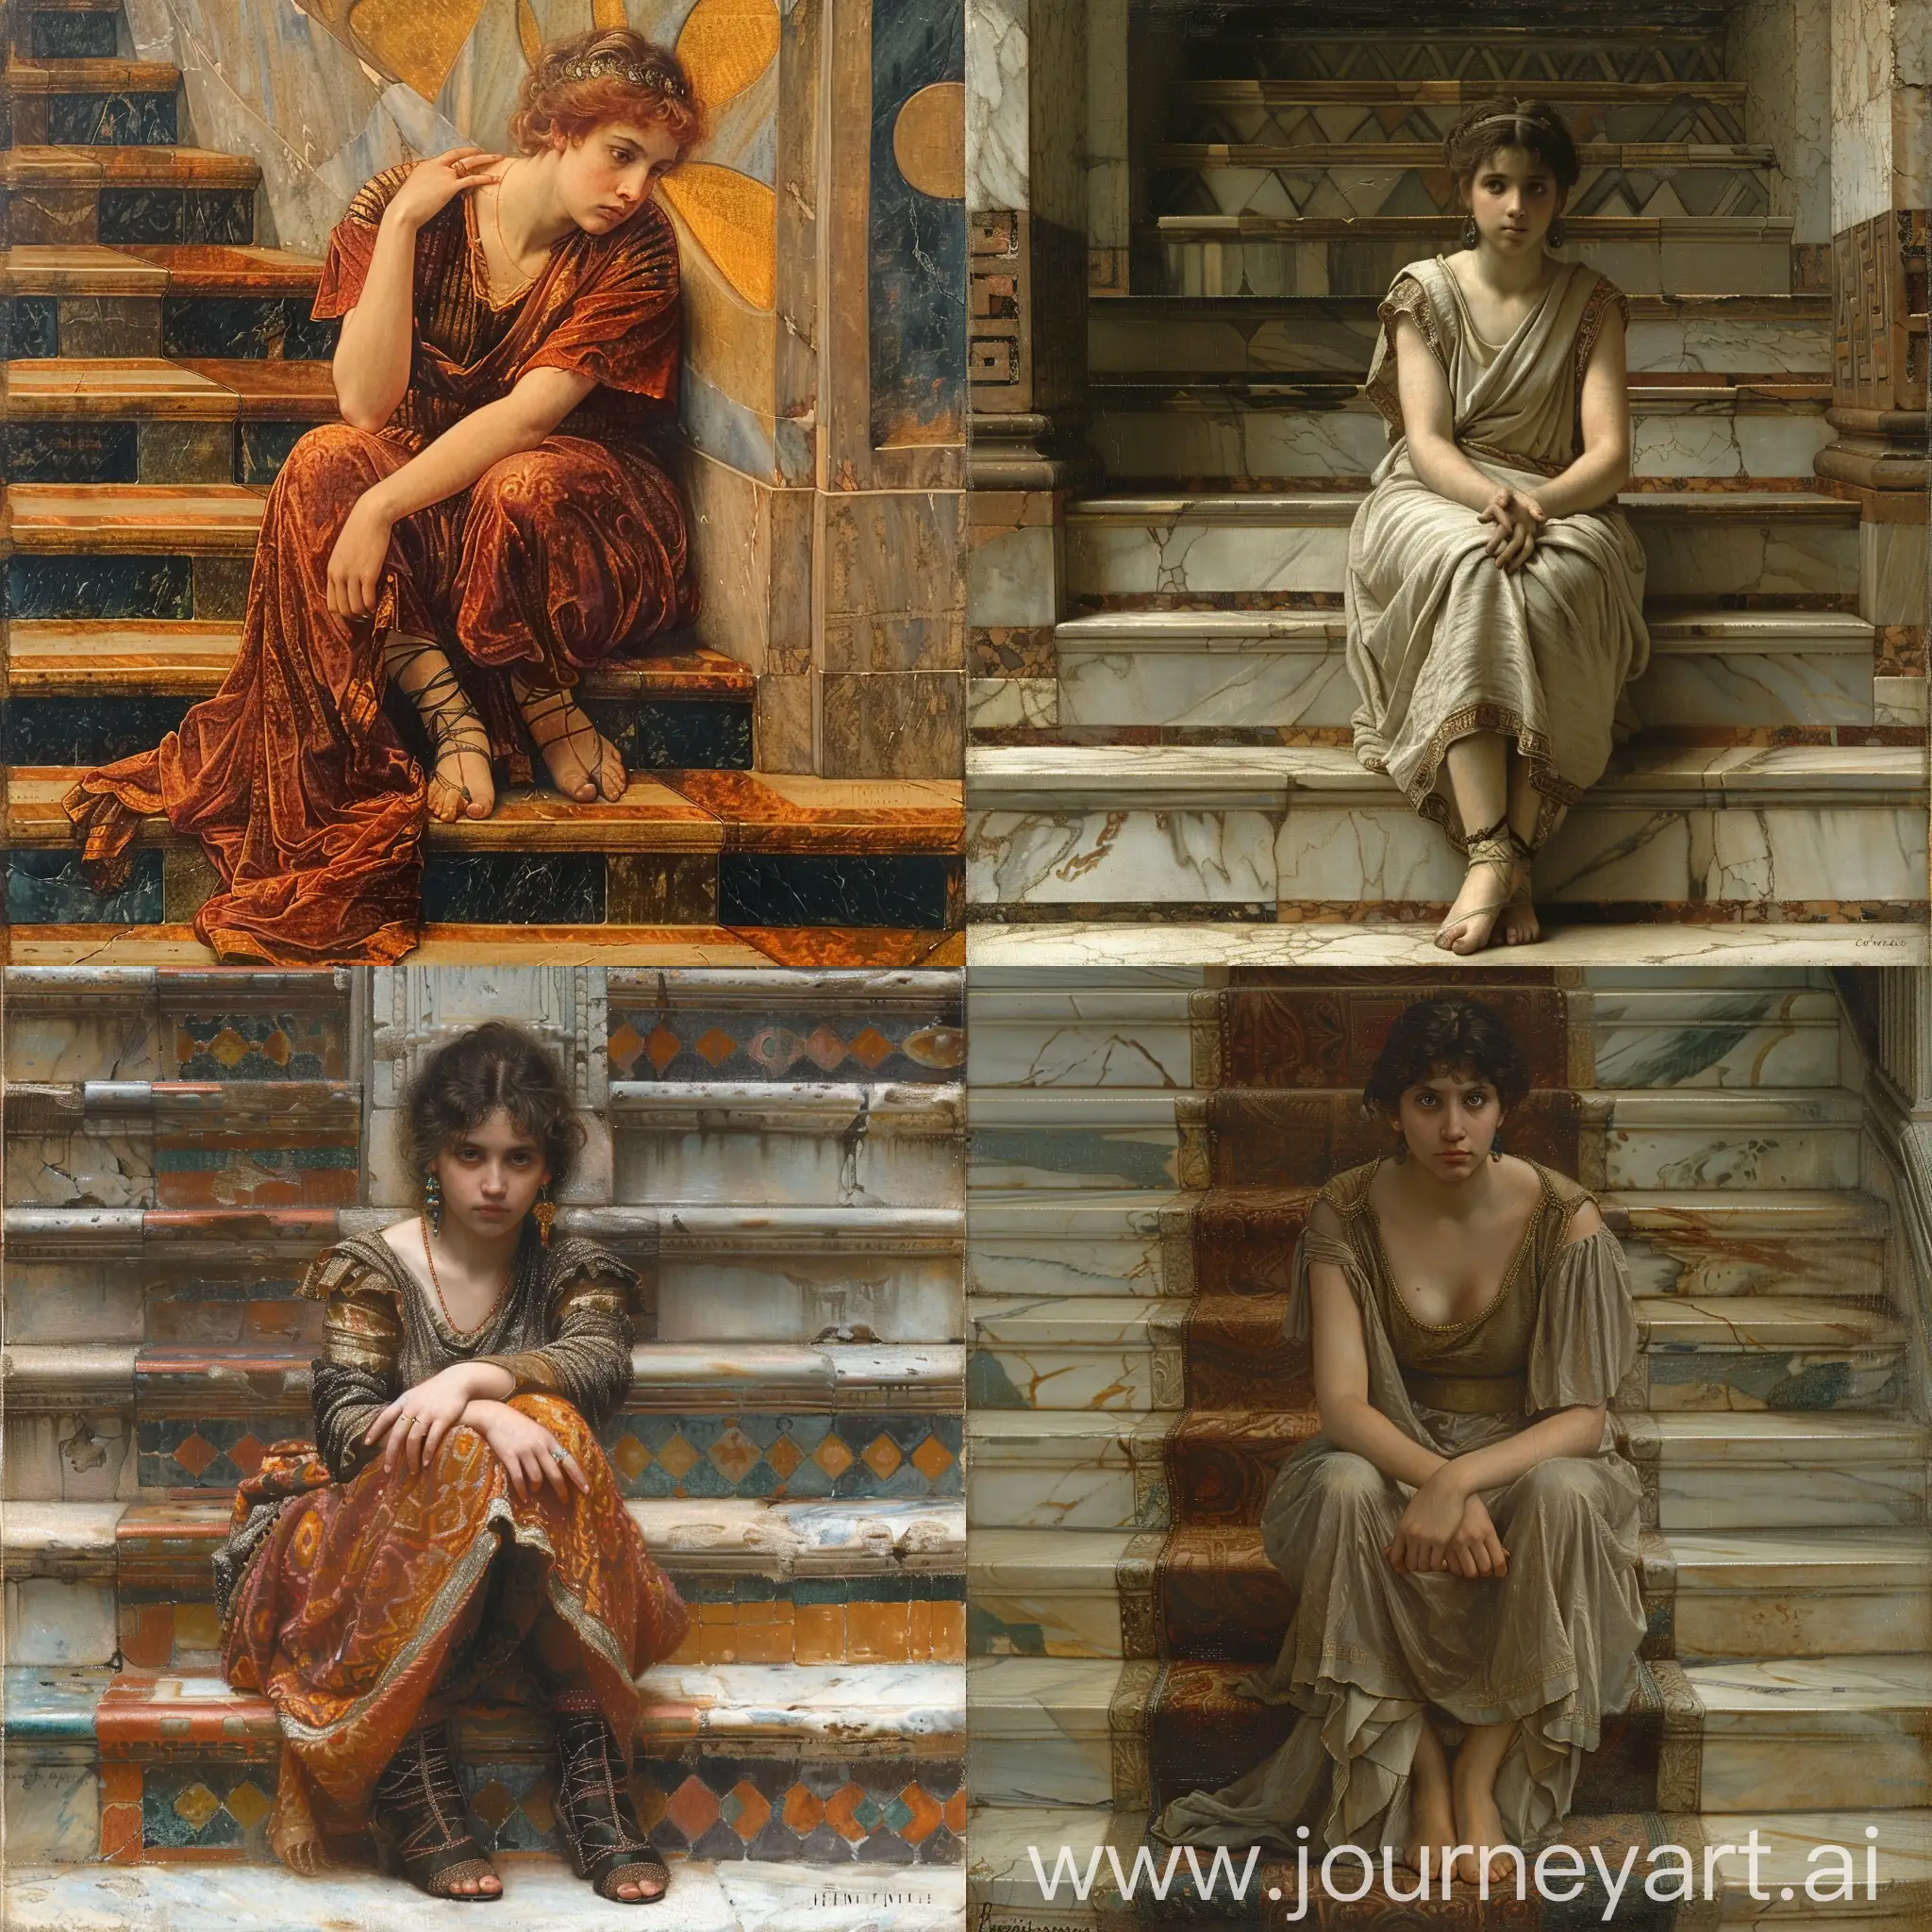 Renaissance-Painting-of-an-Ancient-Roman-Girl-Sitting-on-a-Staircase